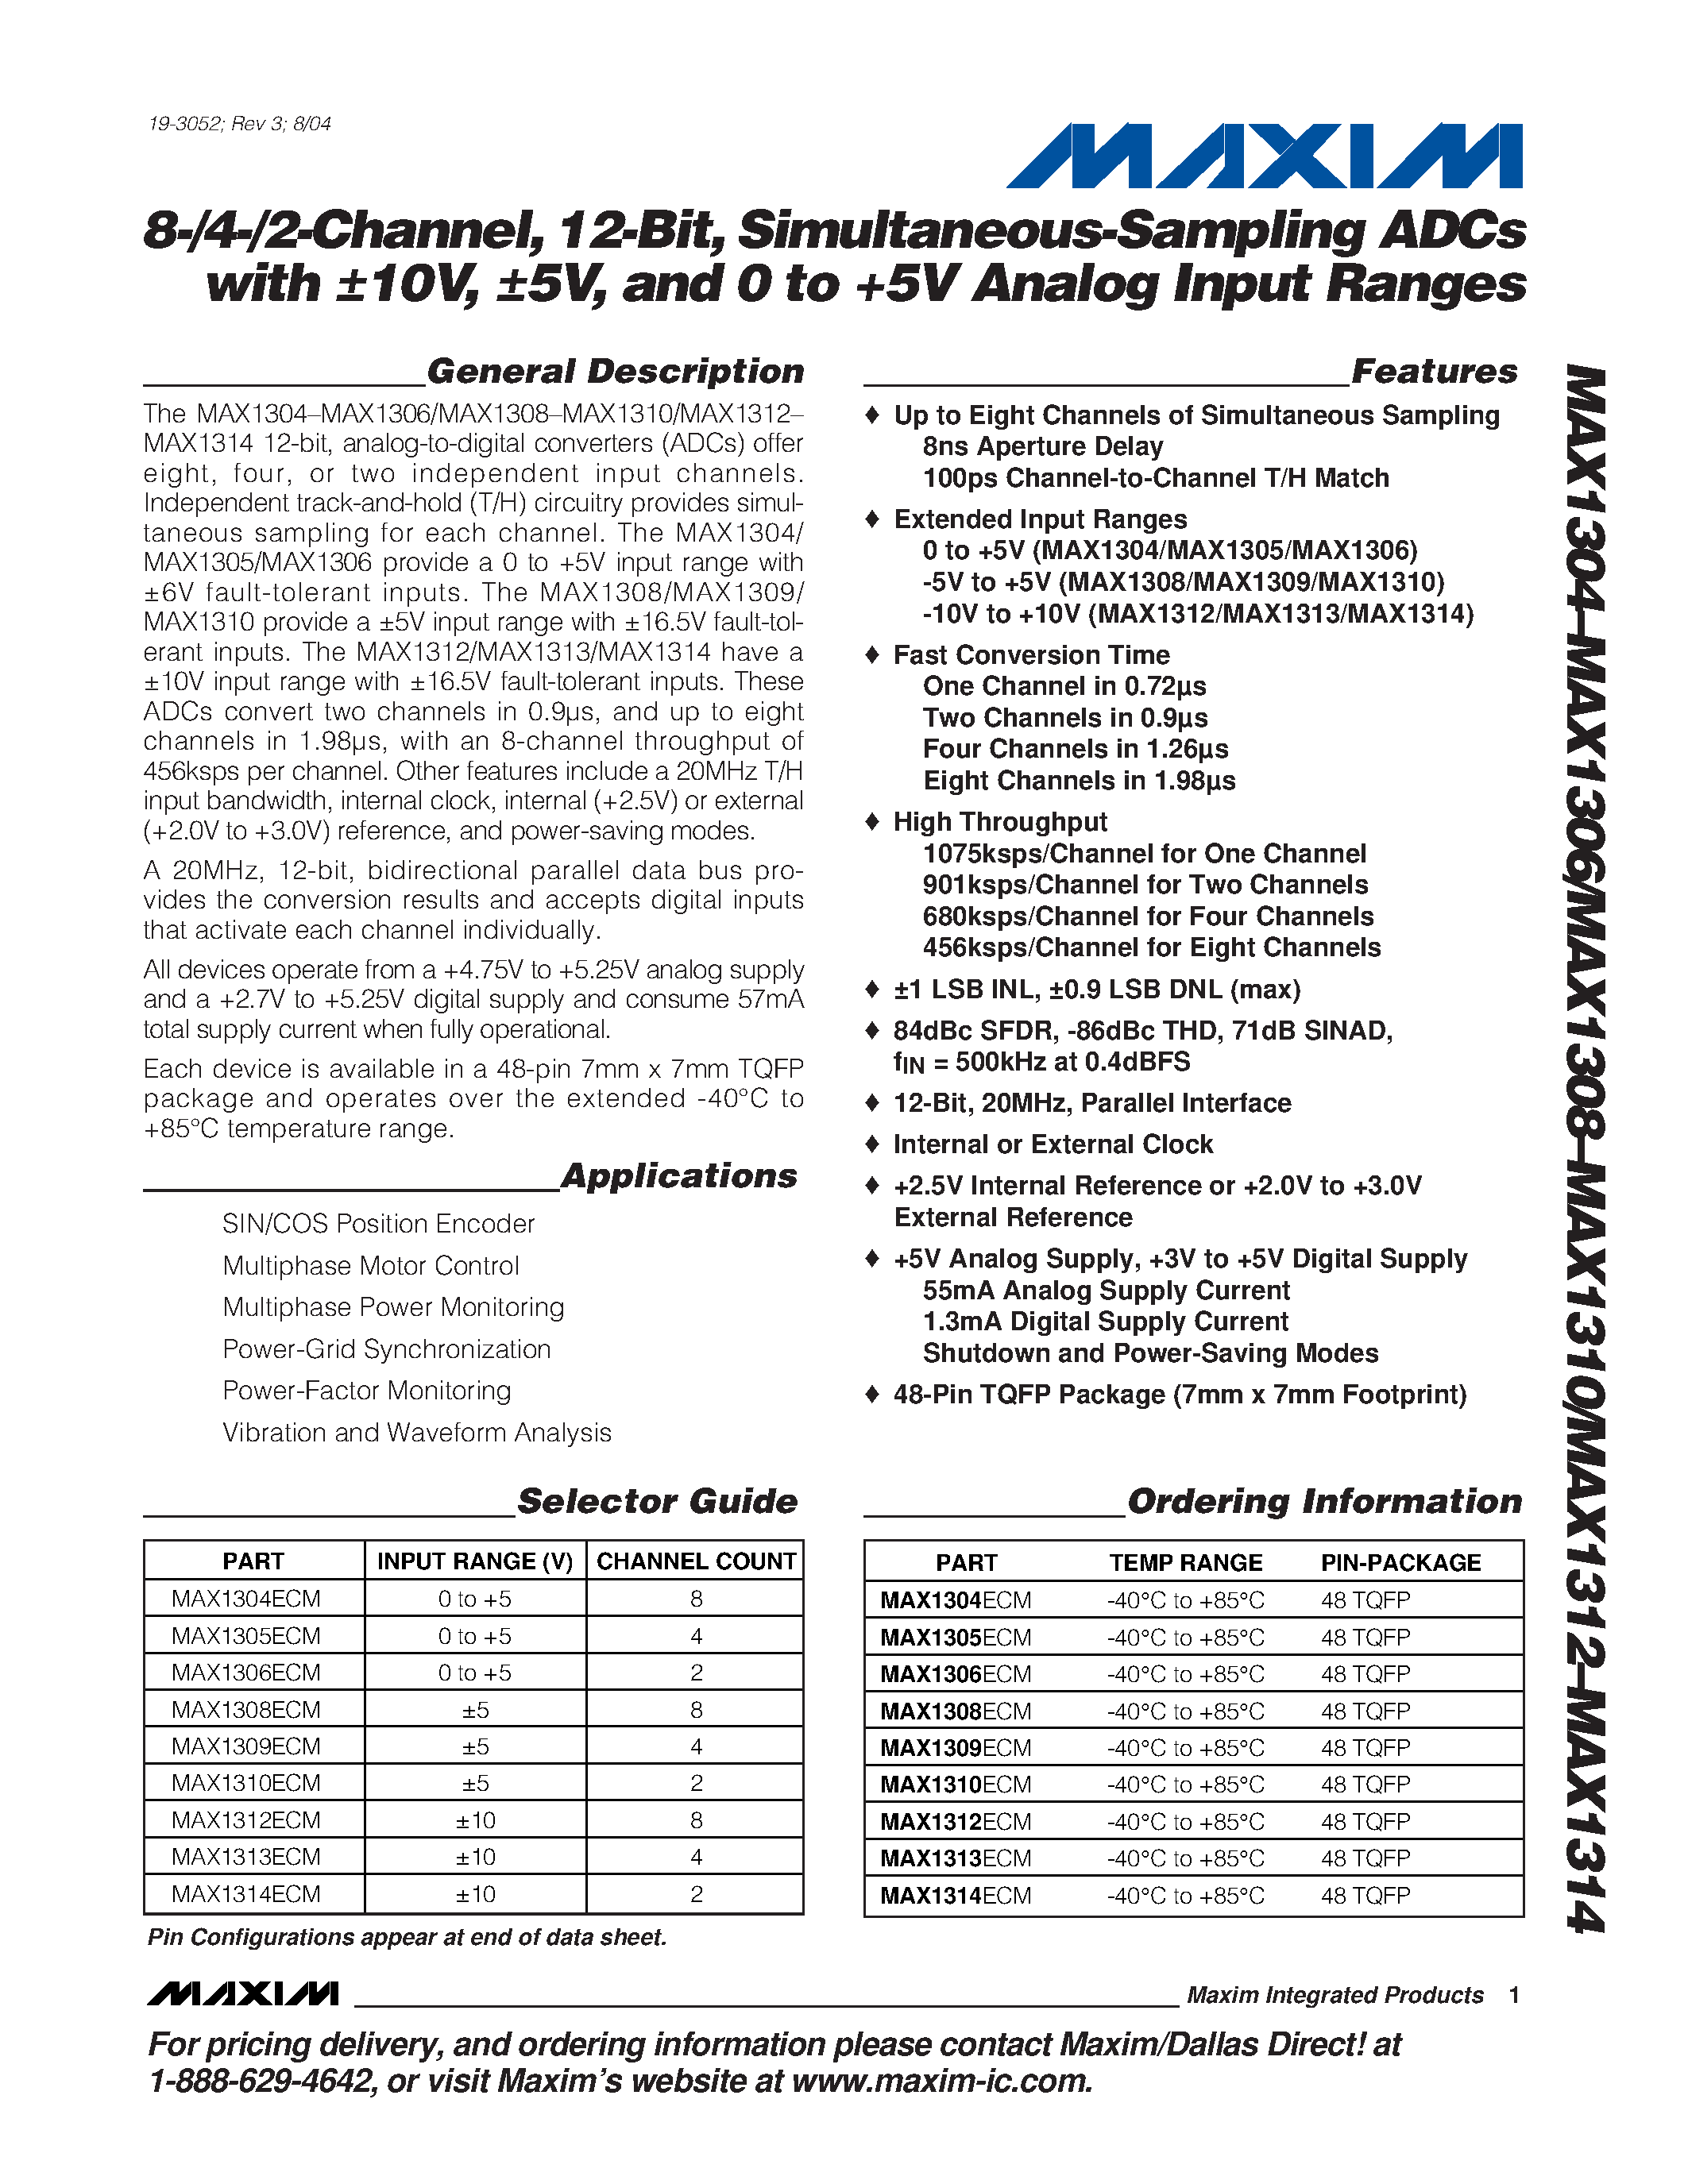 Datasheet MAX1308 - 8-/4-/2-Channel / 12-Bit / Simultaneous-Sampling ADCs with 10V / 5V / and 0 to +5V Analog Input Ranges page 1